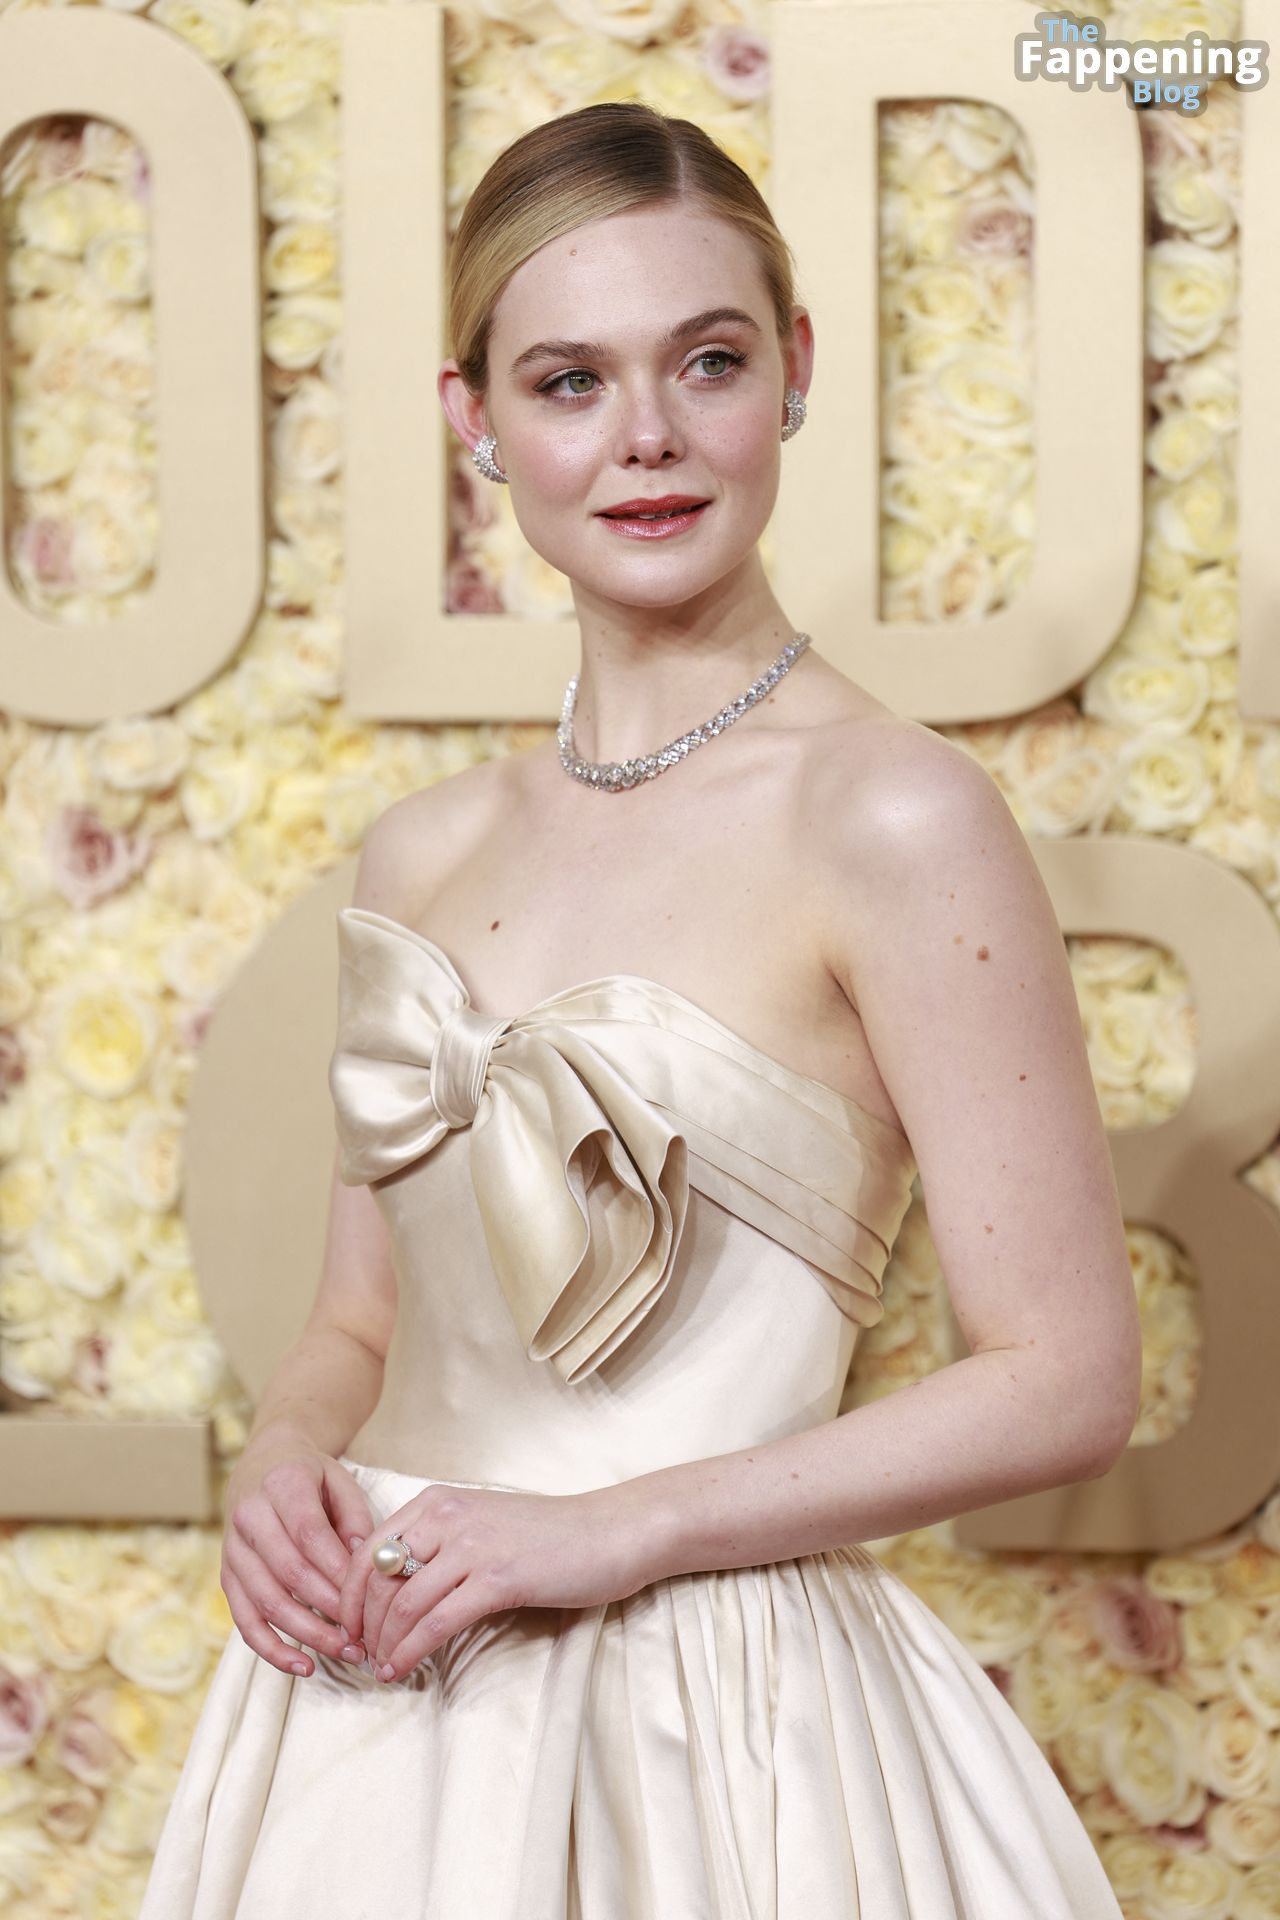 Elle-Fanning-Sexy-95-The-Fappening-Blog.jpg